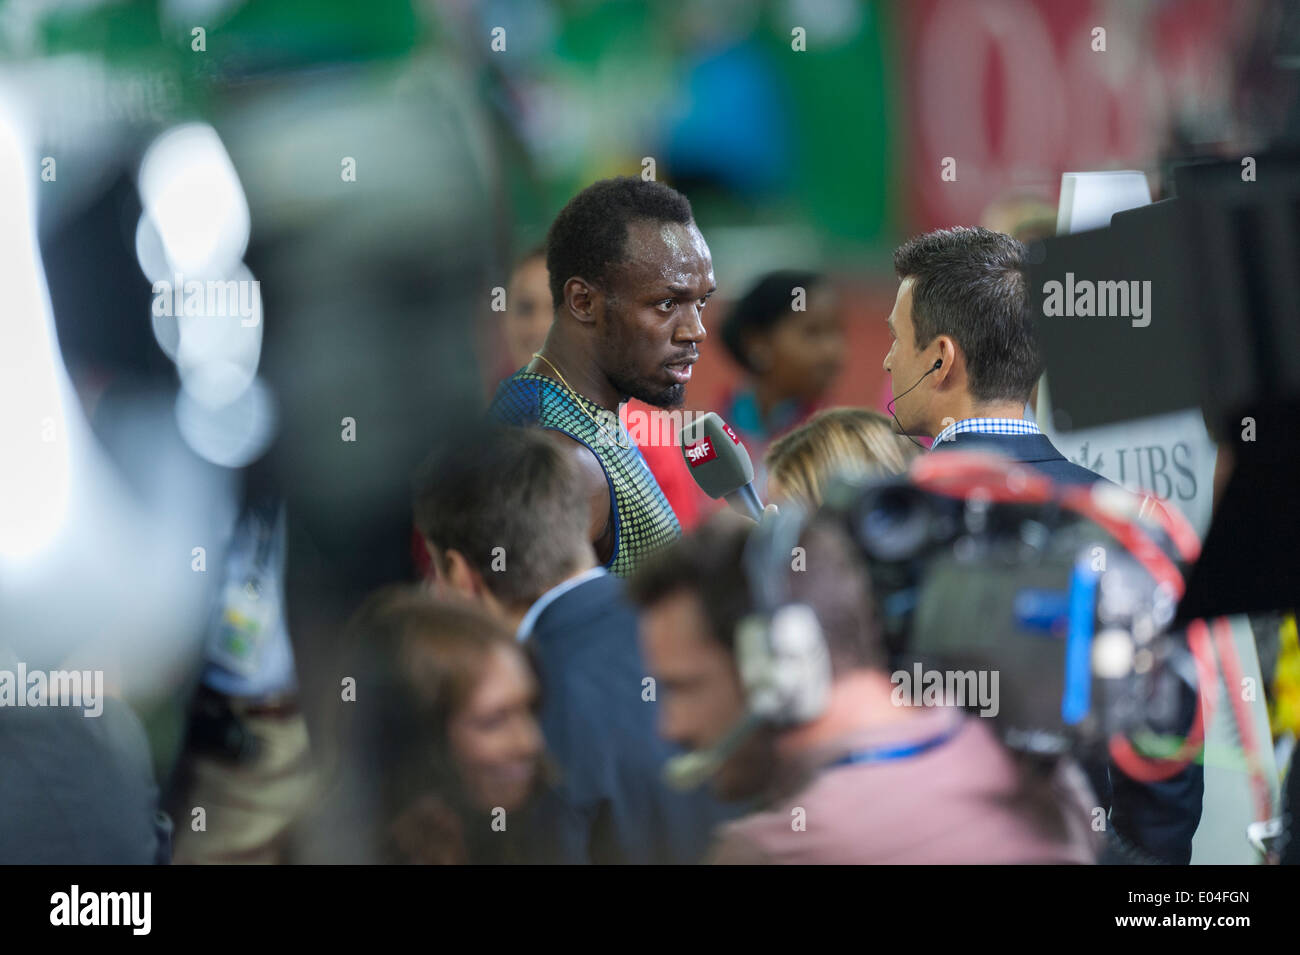 Usain Bolt (JAM) is surrounded by journalists after his victory at the 100m IAAF Diamond League final Diamond race in Zurich Stock Photo